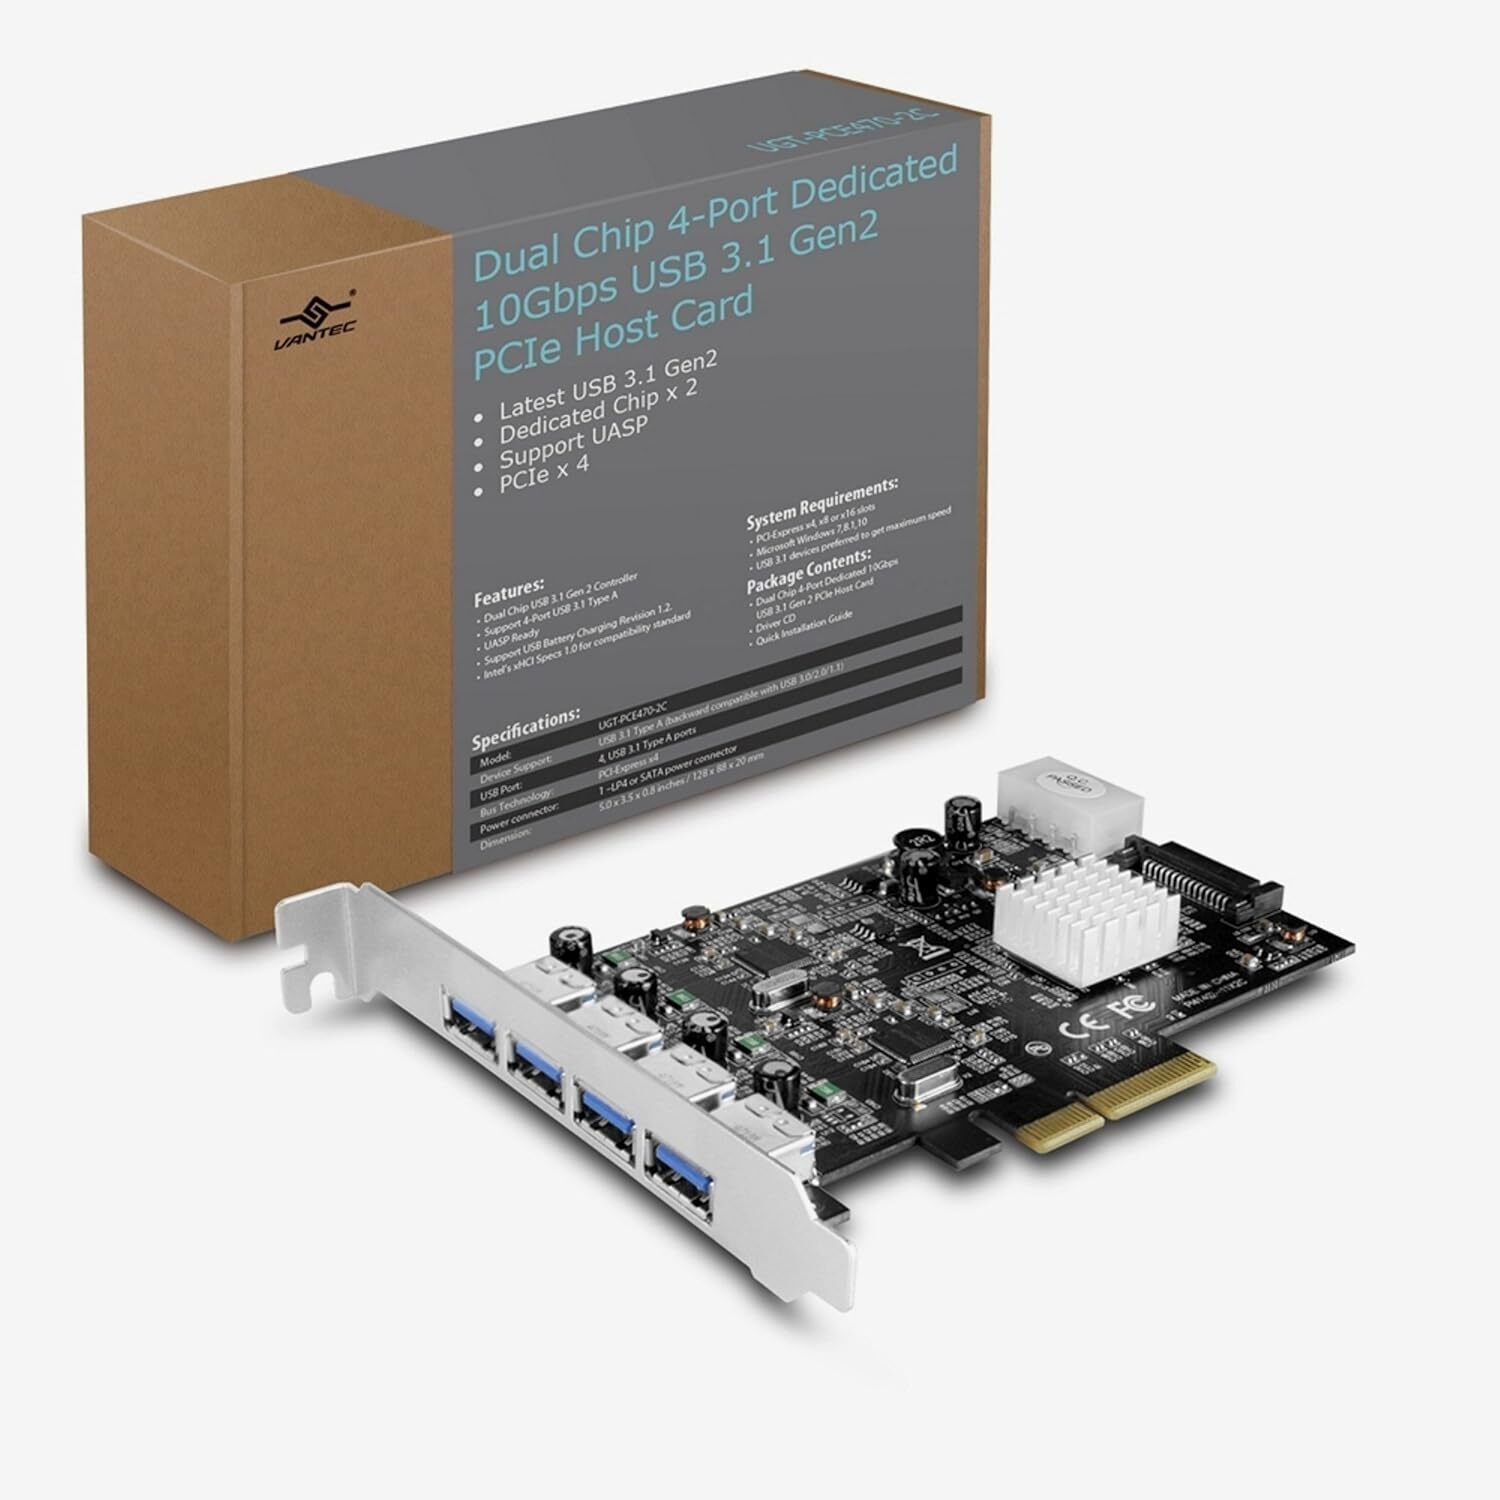 Vantec 4-Port Dedicated 10Gbps USB 3.1 Gen 2 PCIe Host Card with Dual Controll